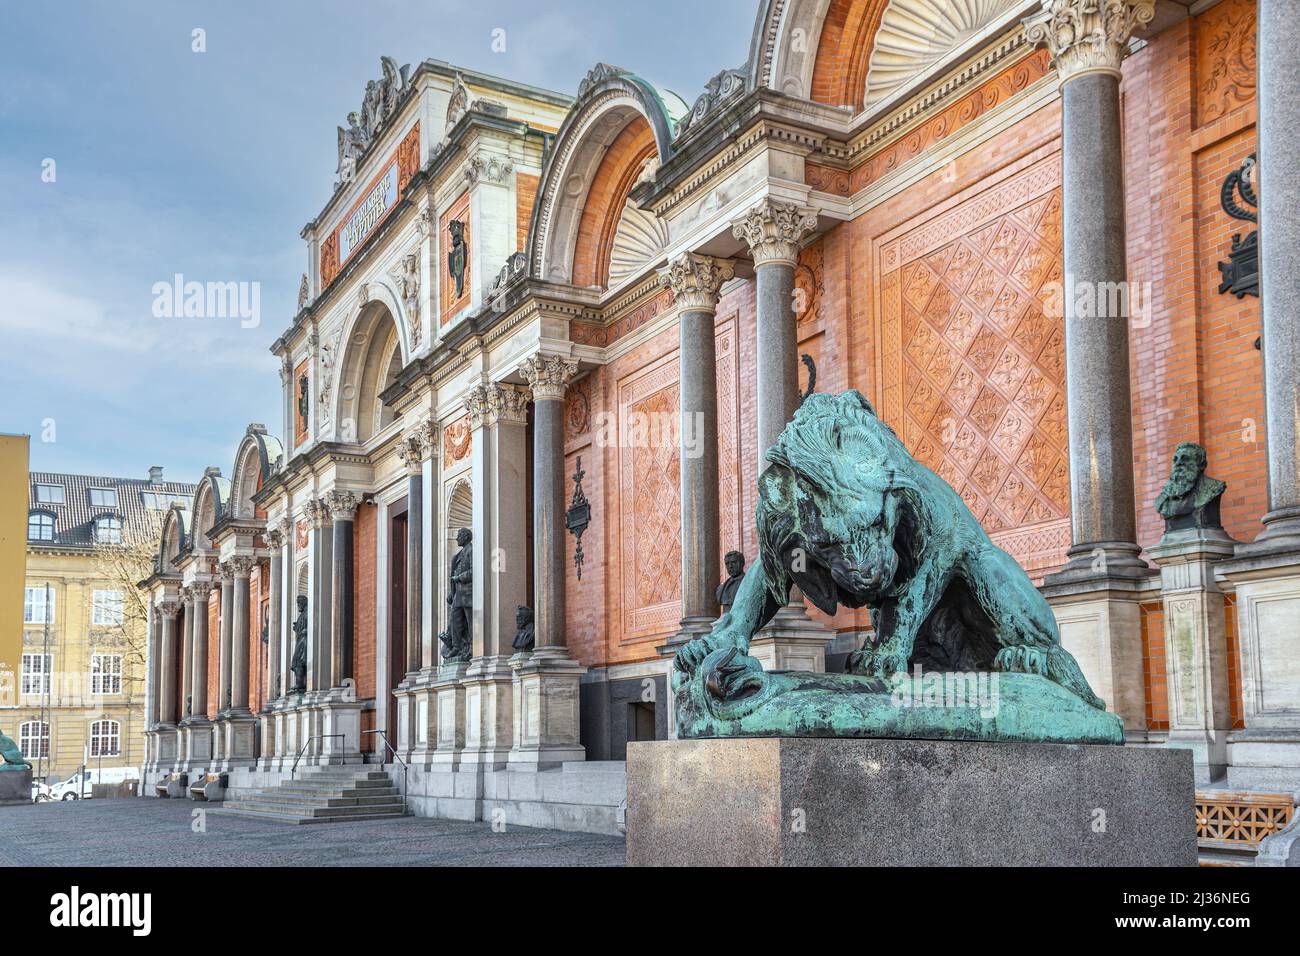 Facade of the museum, Ny Carlsberg Glyptotek, of fine arts, in the foreground the bronze statue of a lion attacking a snake. Copenhagen, Denmark Stock Photo